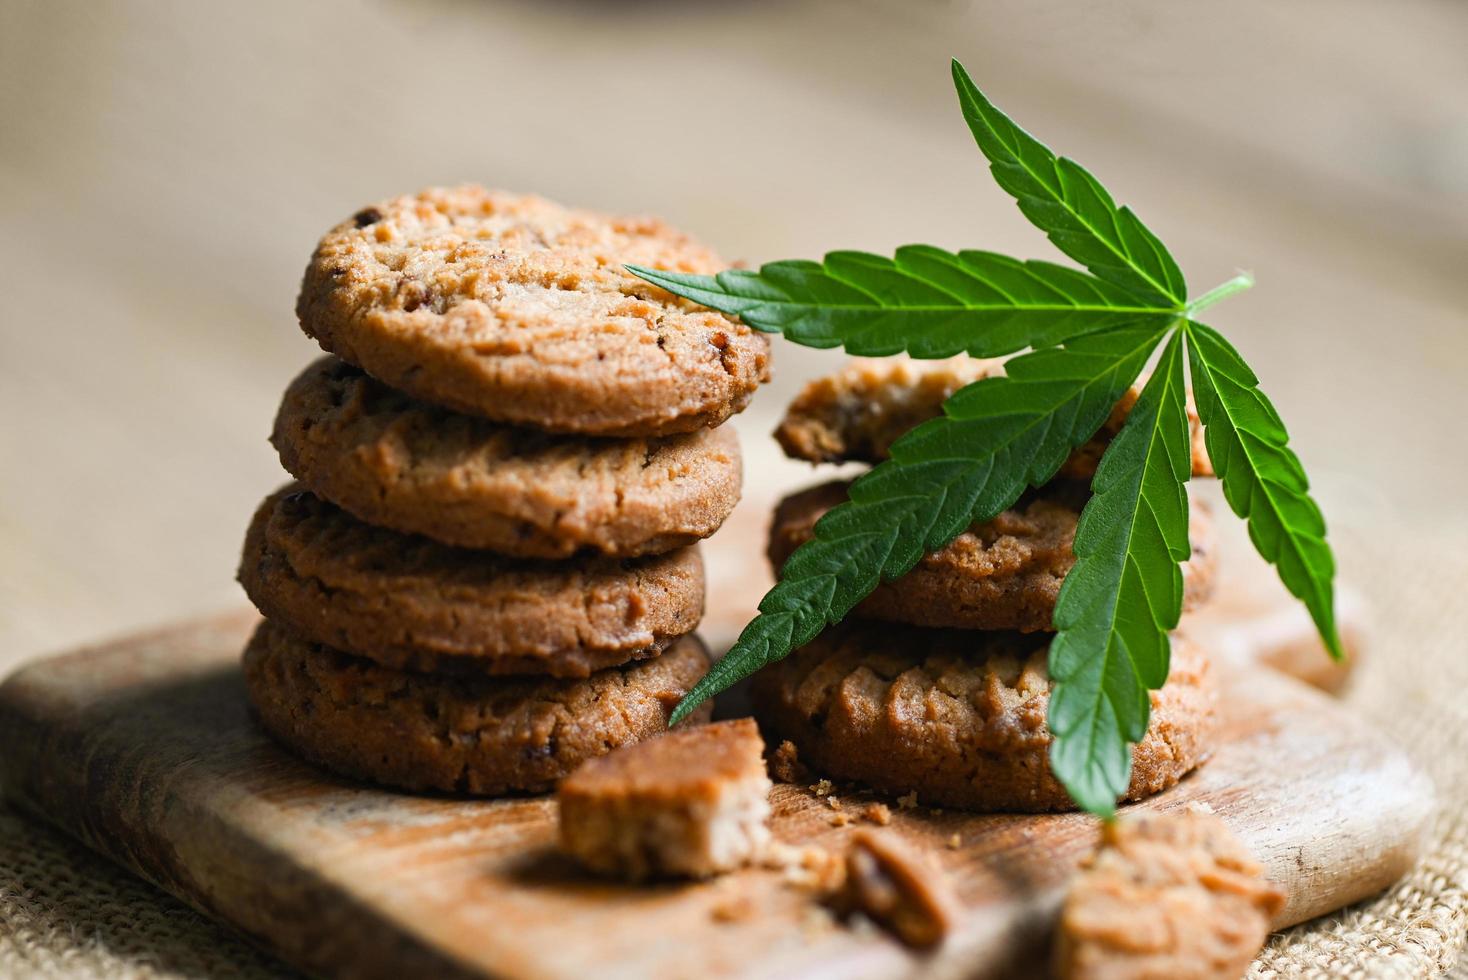 Cannabis food cookies with cannabis leaf marijuana herb on wooden background, delicious sweet dessert cookie with hemp leaf plant THC CBD herbs food snack and medical photo